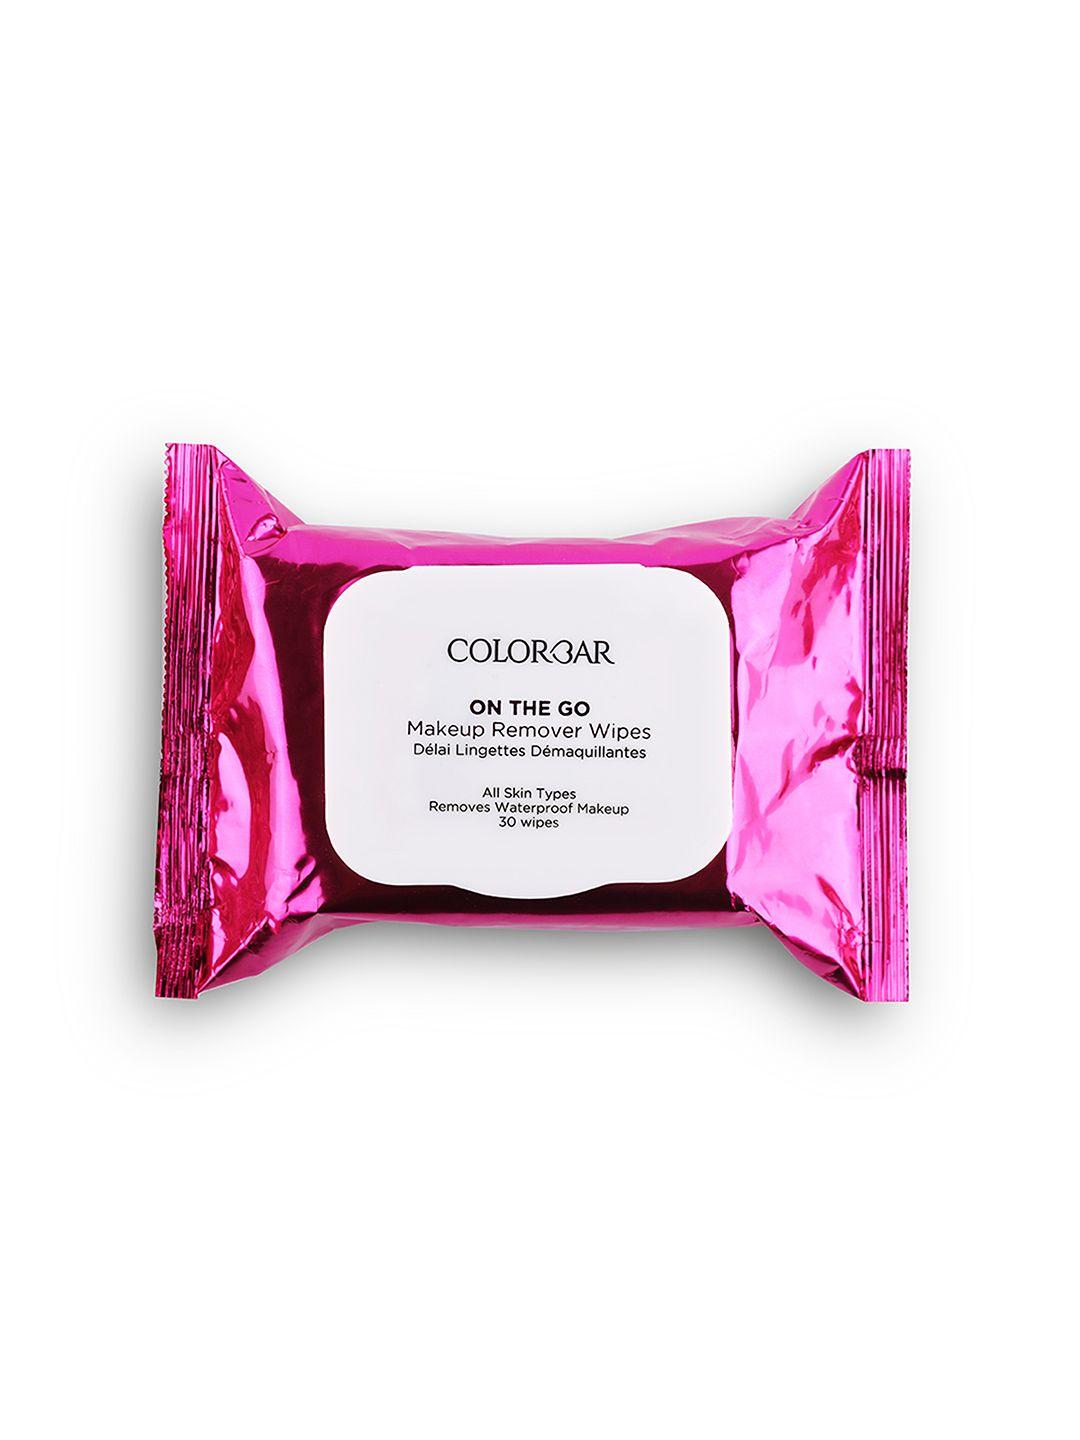 colorbar on the go makeup remover wipes with aloe vera for all skin types - 30 wipes